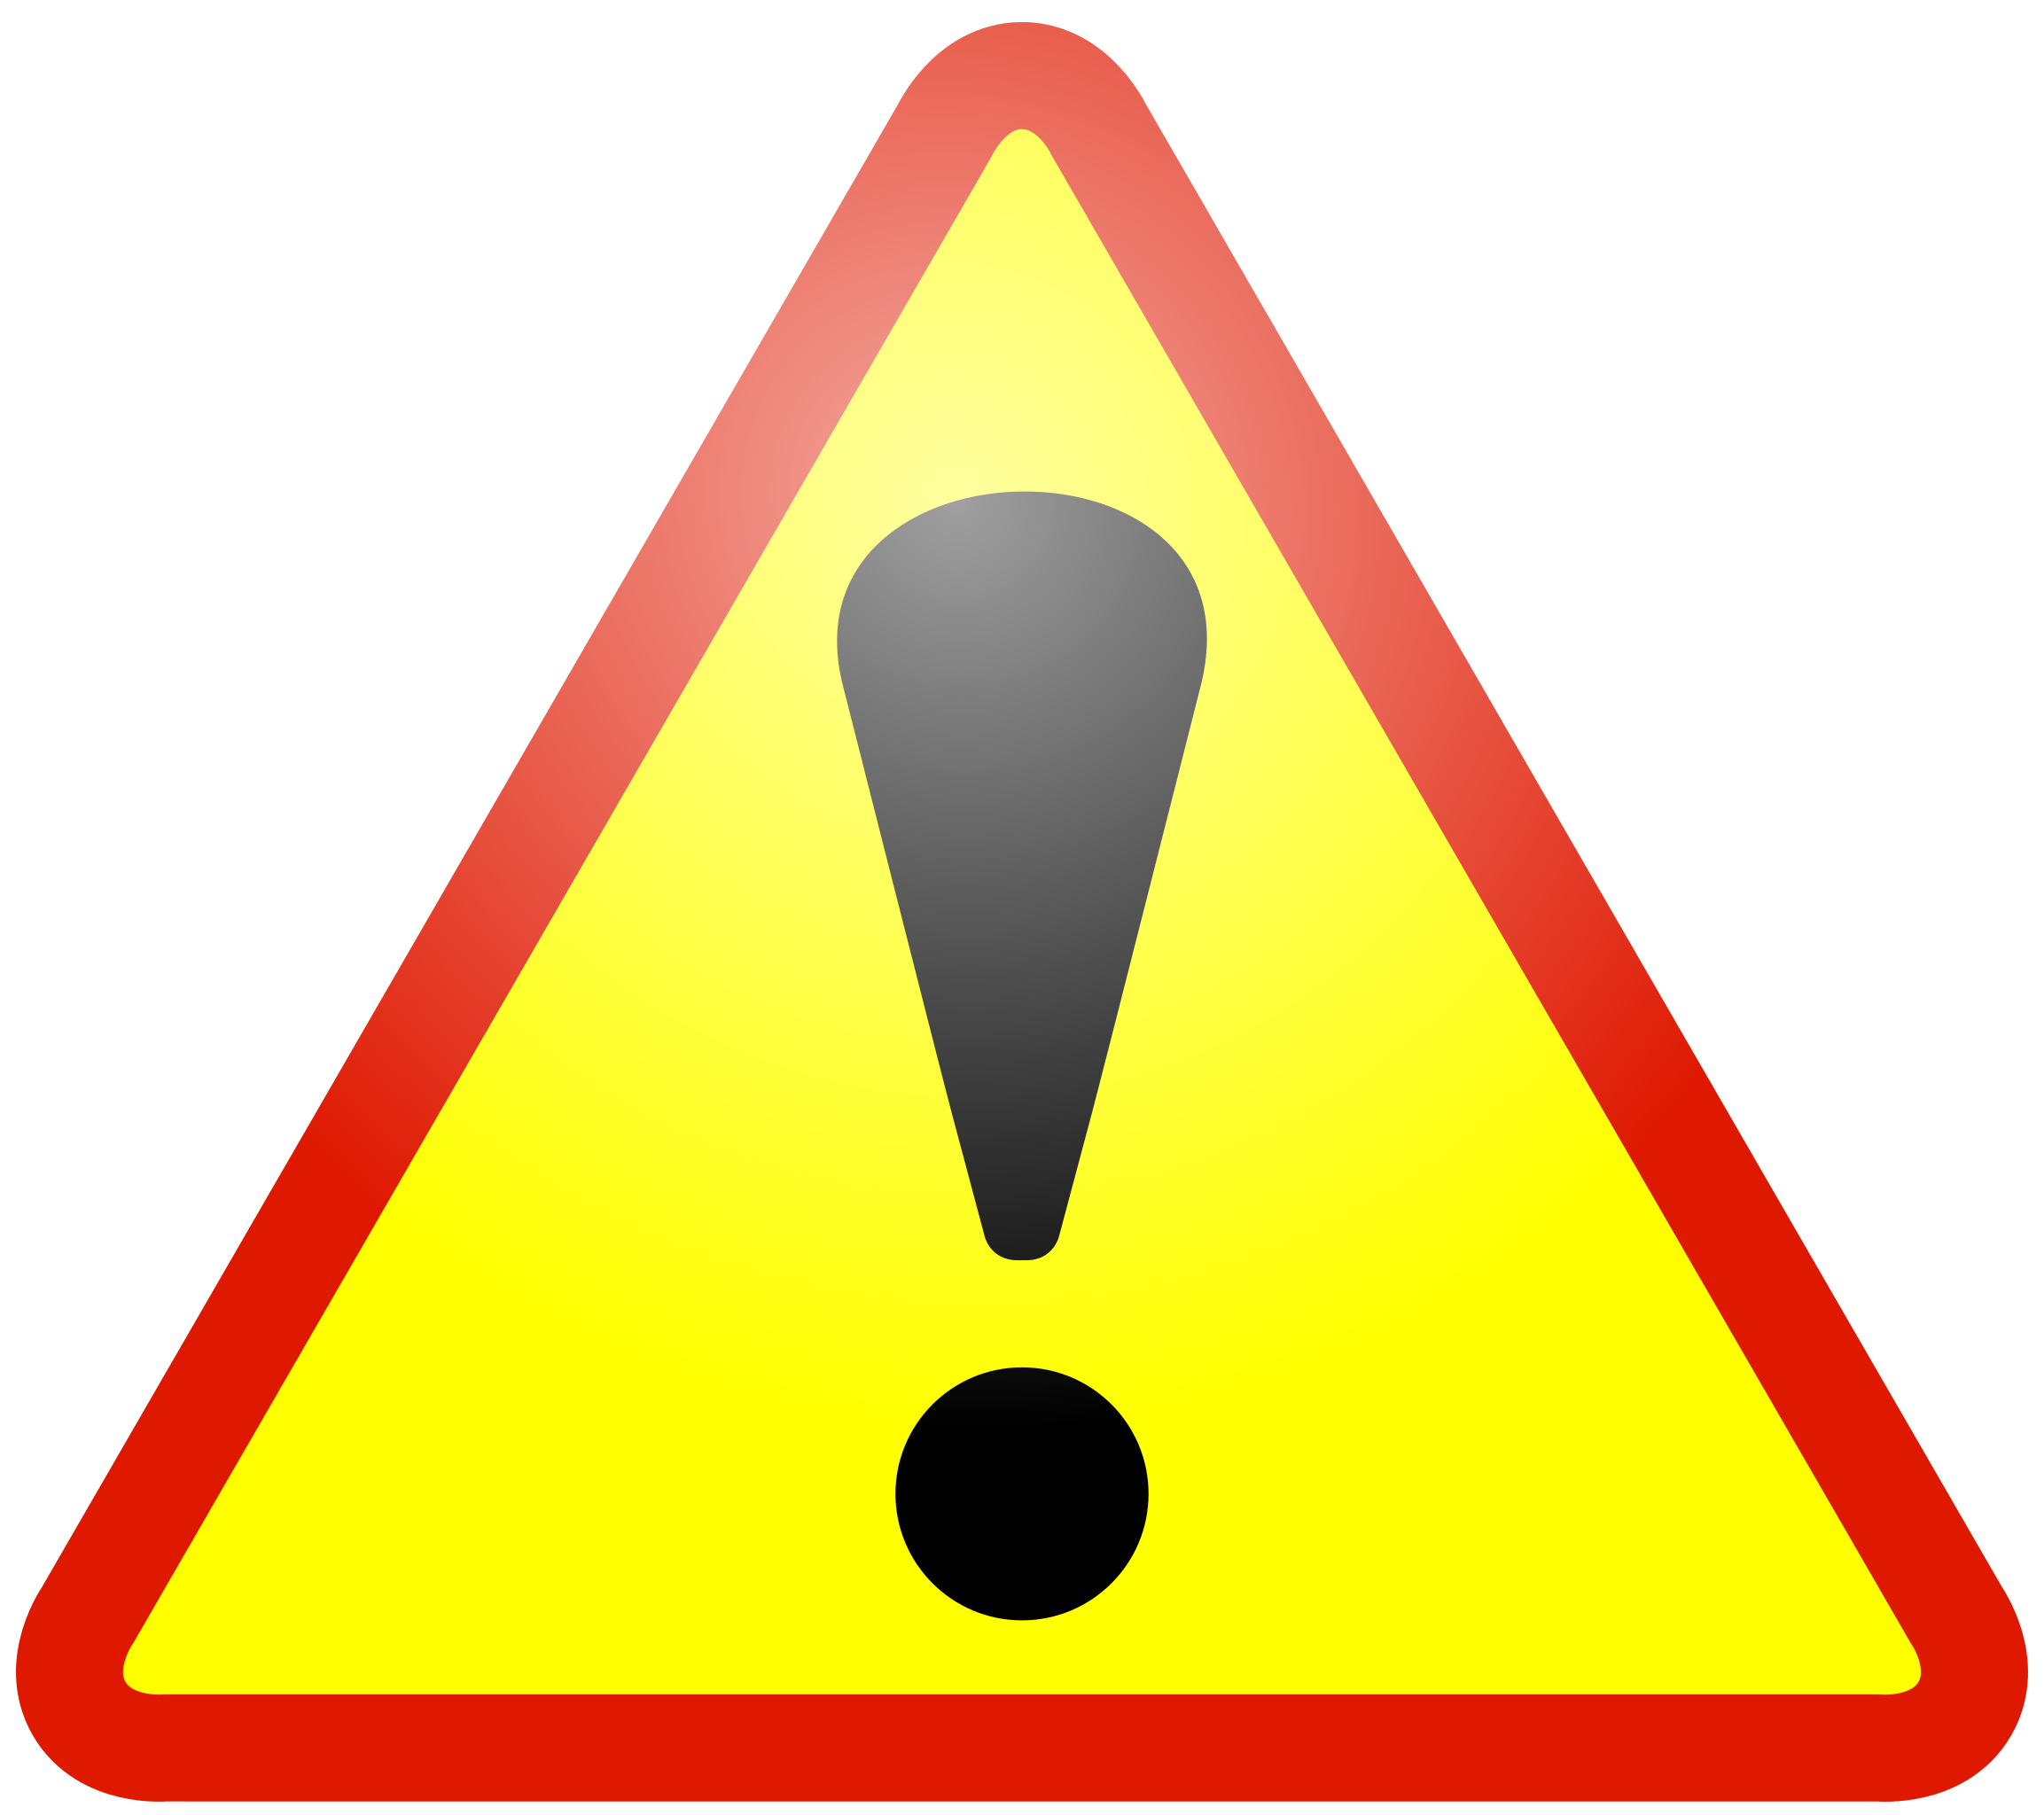 Warning sign over a program icon